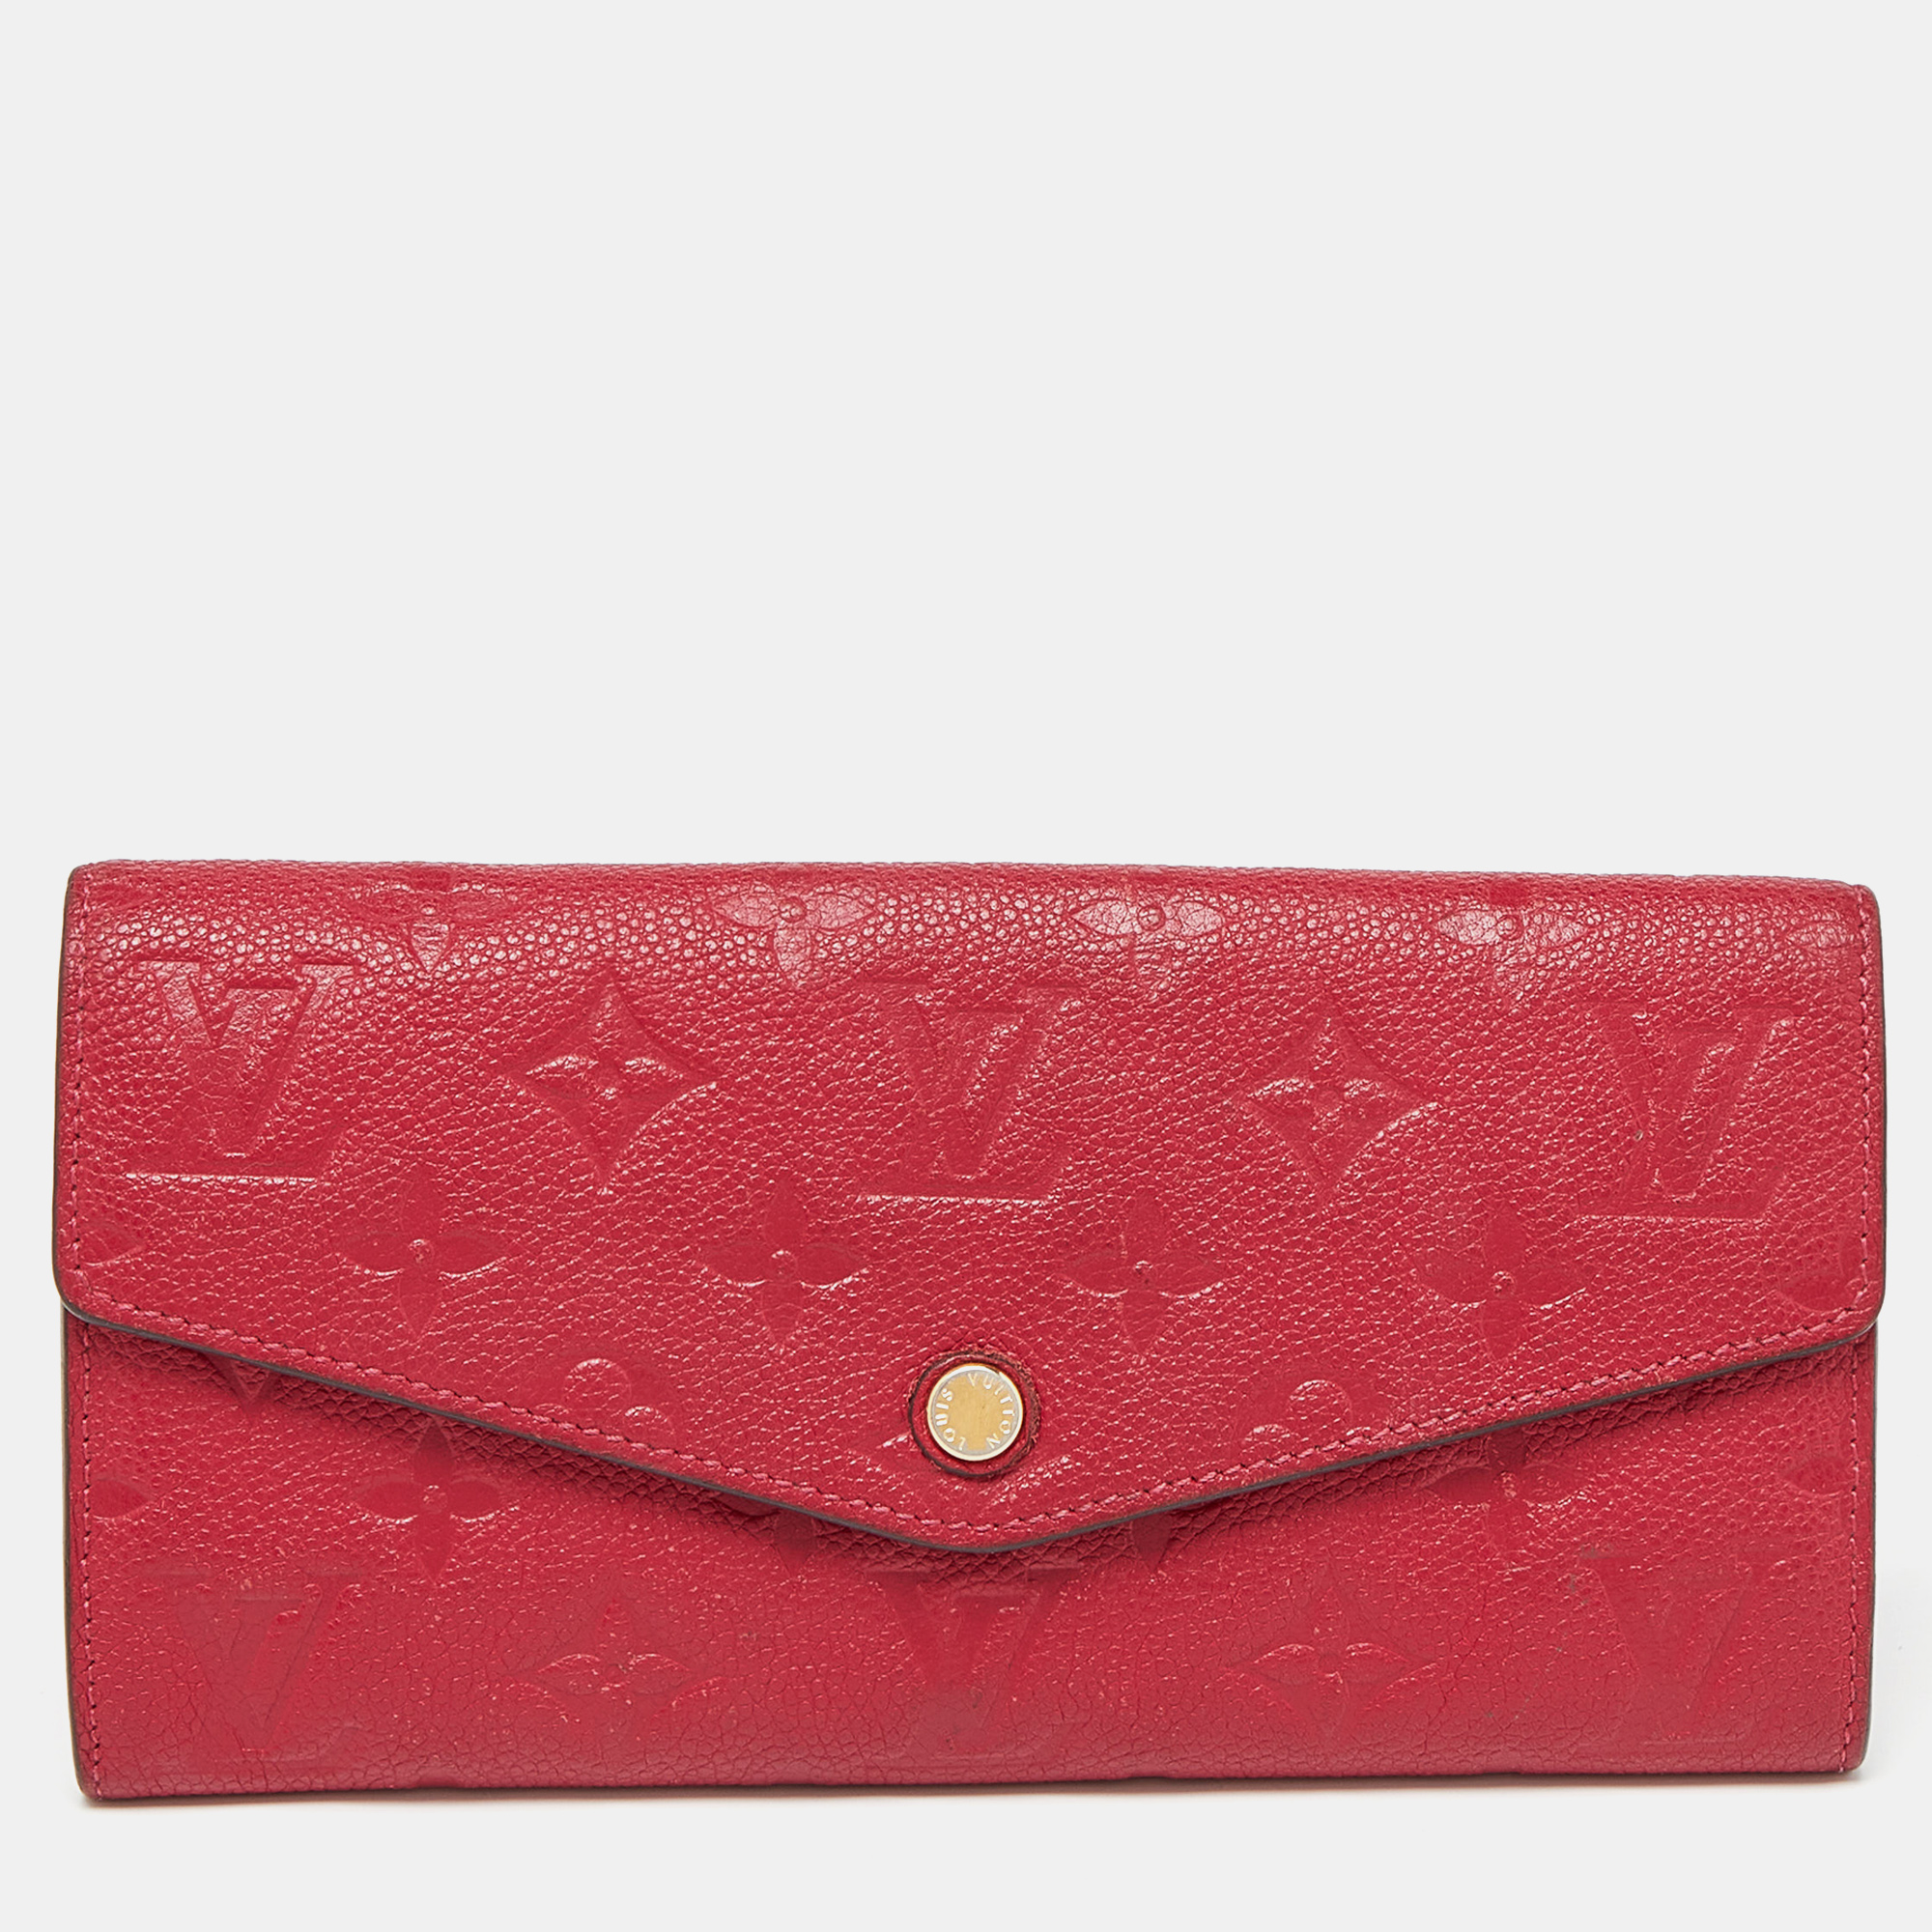 Pre-owned Louis Vuitton Jaipur Monogram Empreinte Leather Curieuse Wallet In Red